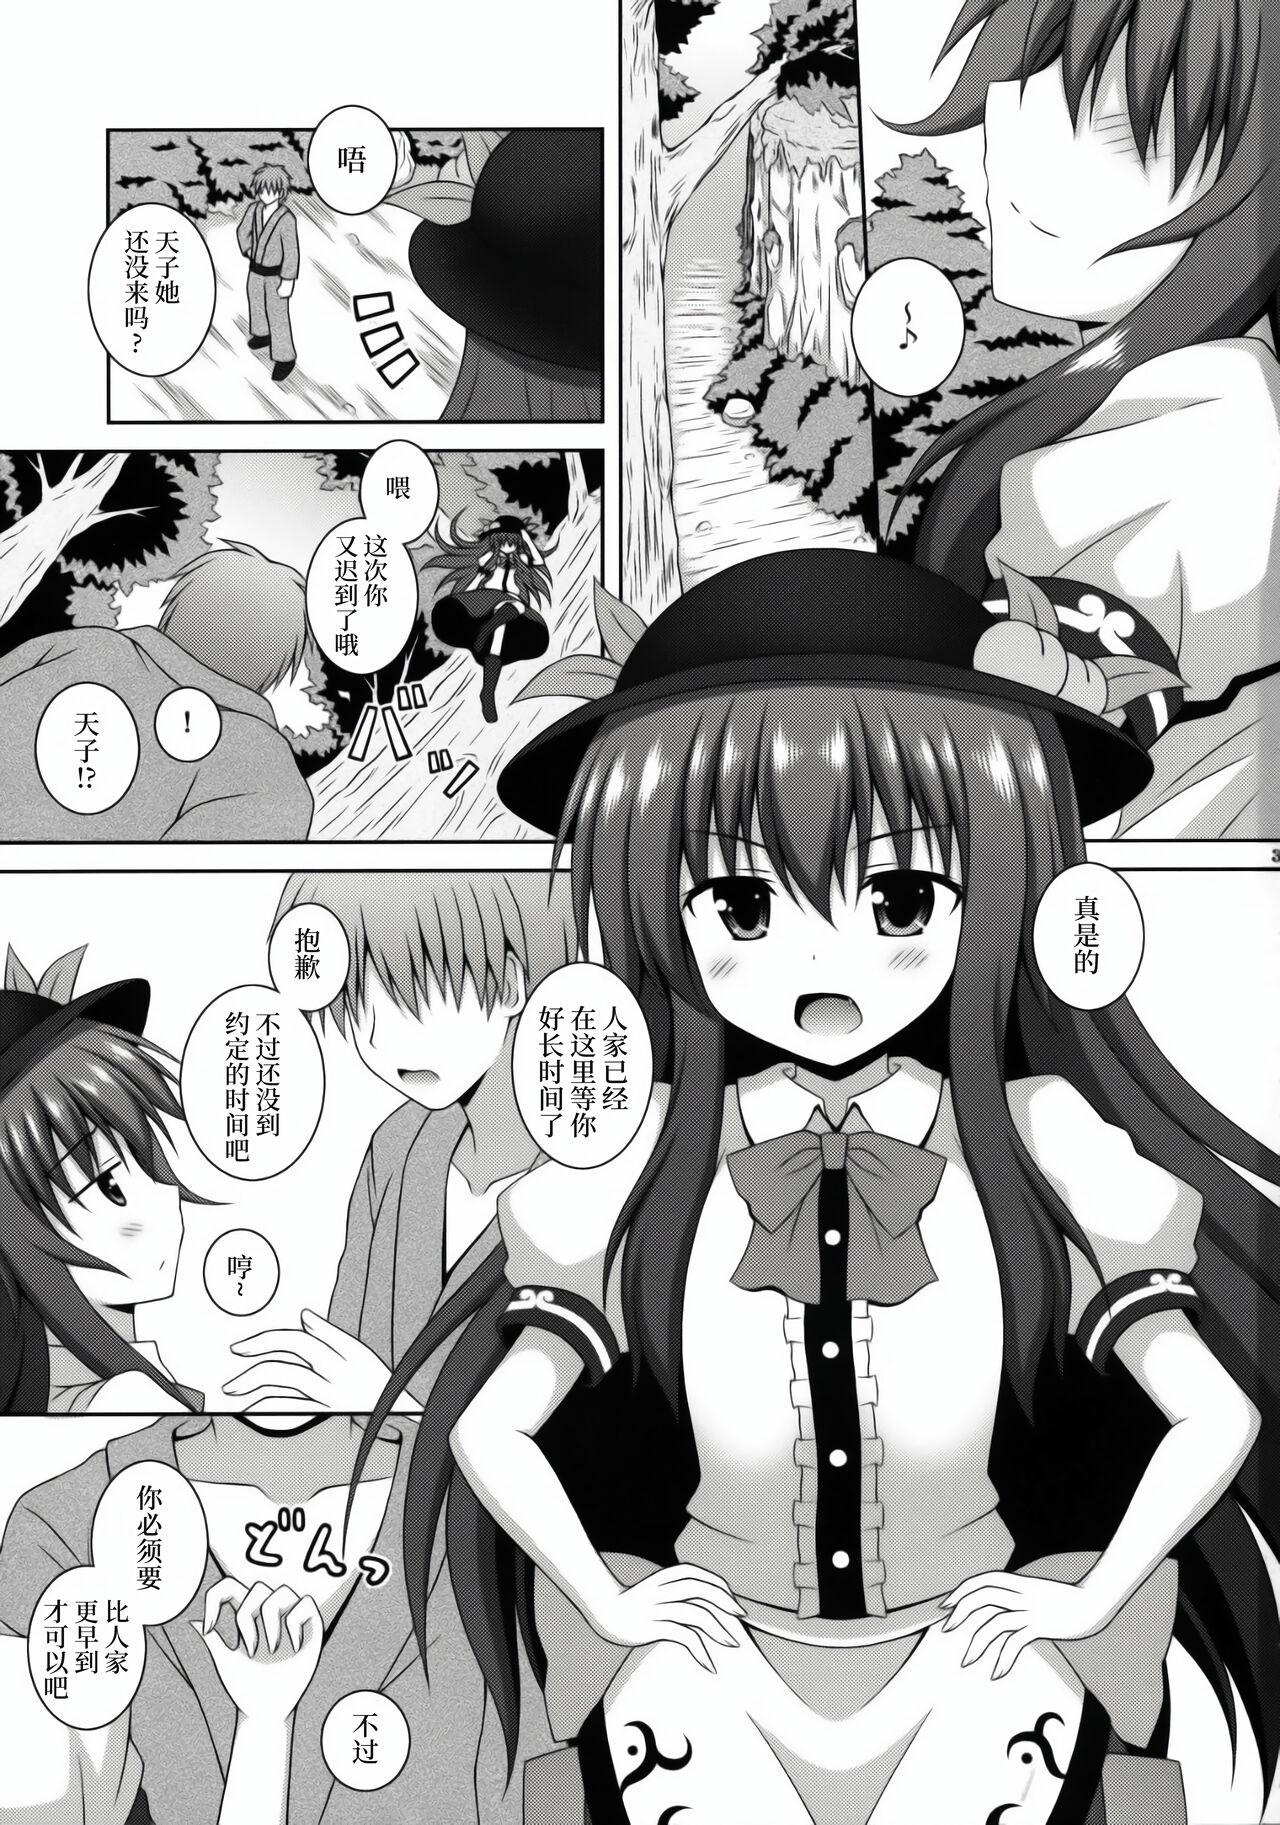 Chacal Selfish Angel | 任性的天使 - Touhou project Oral Sex - Page 3